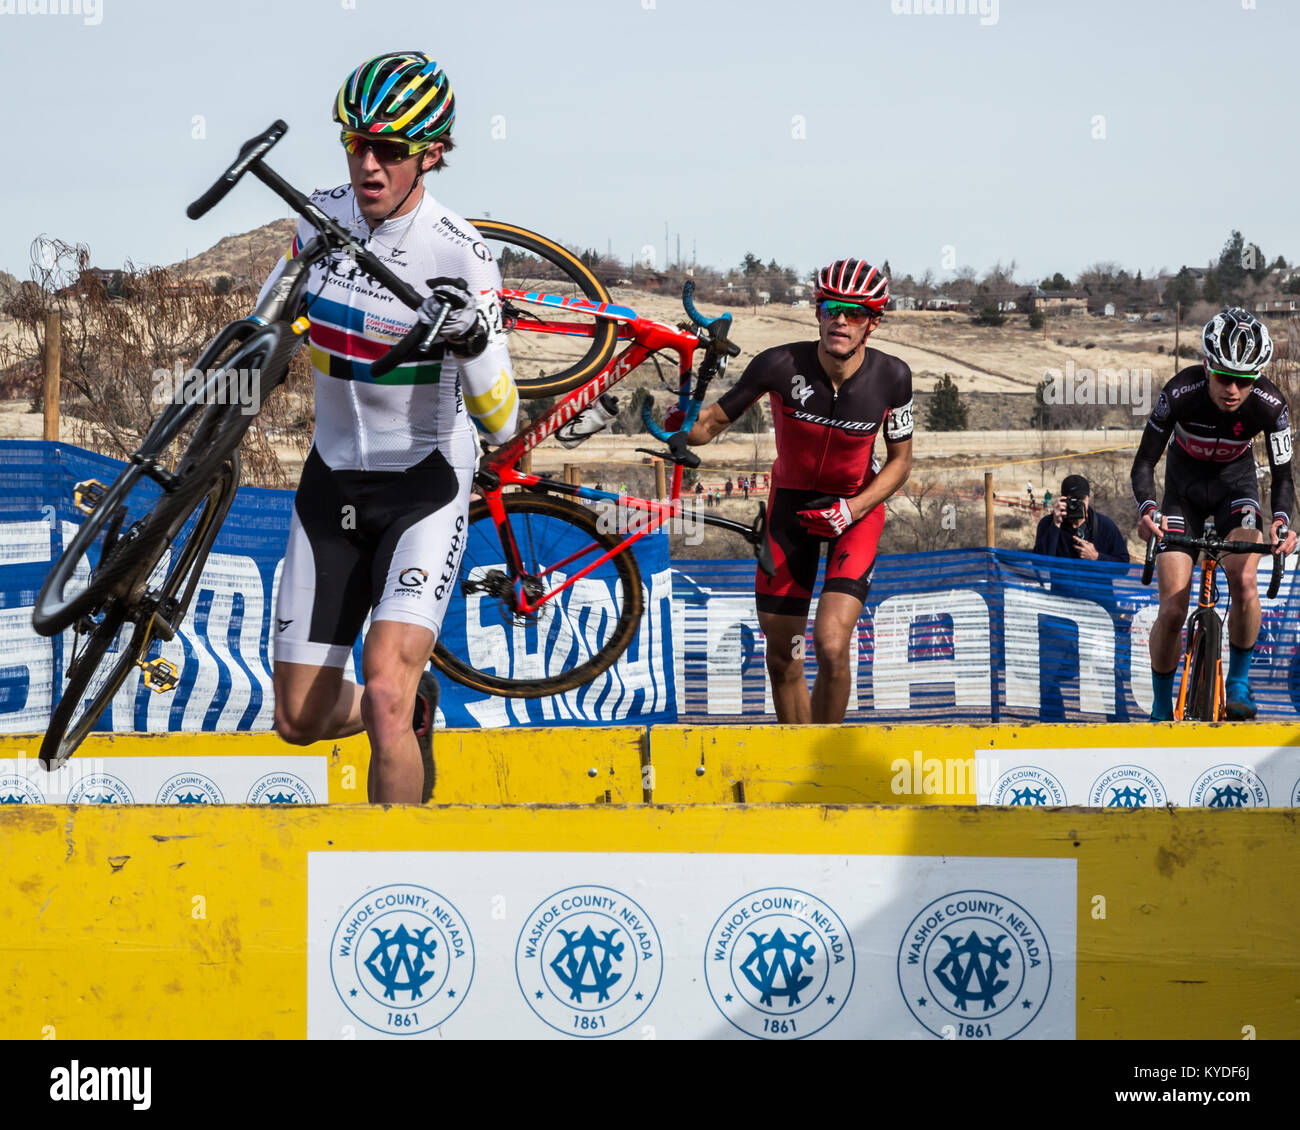 Reno, Nevada, USA. 14th Jan, 2018. GAGE HECHT (l) bib 102, charges ahead of CHRISTOPHER BLEVINS (c) bib 109, and ERIC BRUNNER, (r), bib 106, during the Men's U23 USA Cycling Cyclocross National Championships at Rancho San Rafael Park in Reno, Nevada, on Sunday, January 14, 2018.Blevins won the race in 52:38. Credit: Tracy Barbutes/ZUMA Wire/Alamy Live News Stock Photo